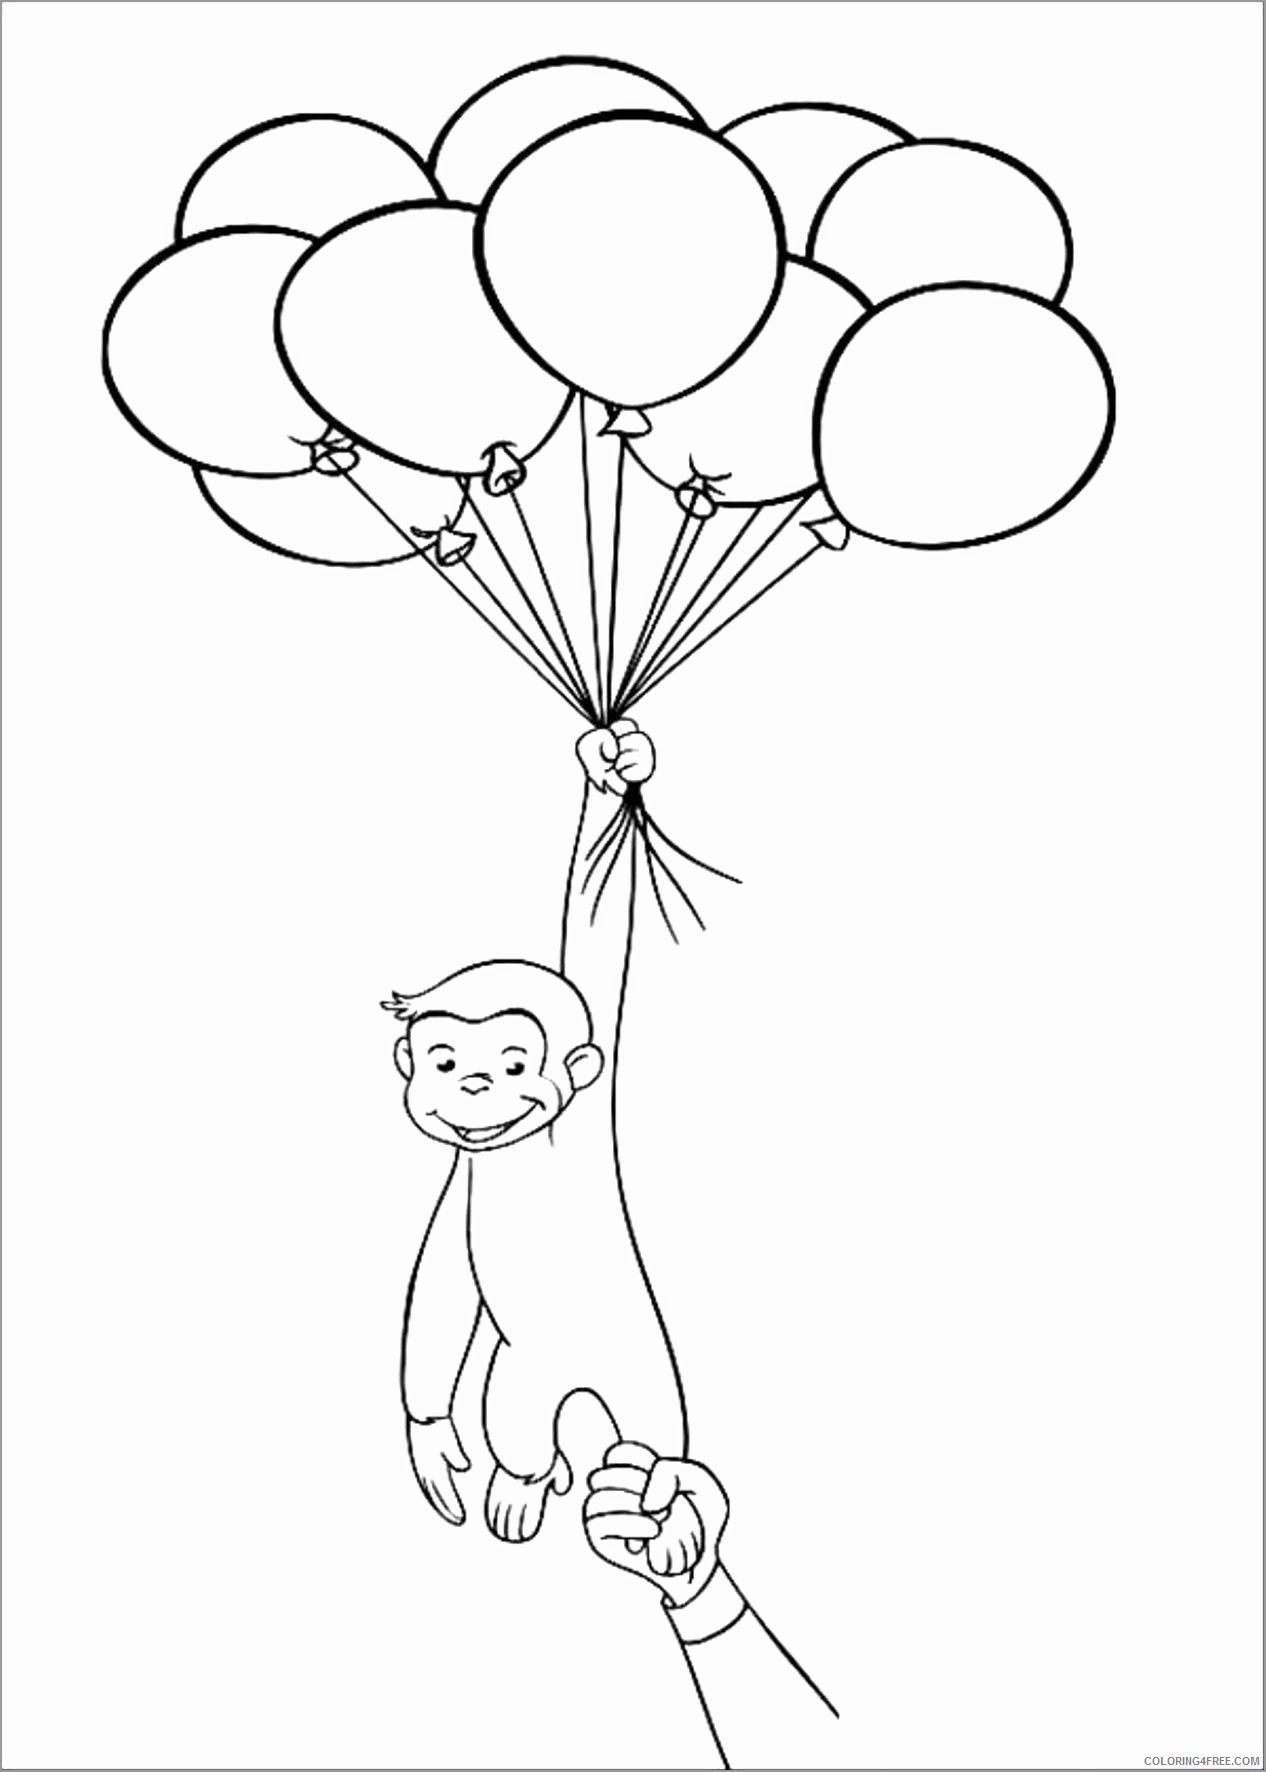 Curious George Coloring Pages Cartoons curious george with balloon unsmushed Printable 2020 1950 Coloring4free